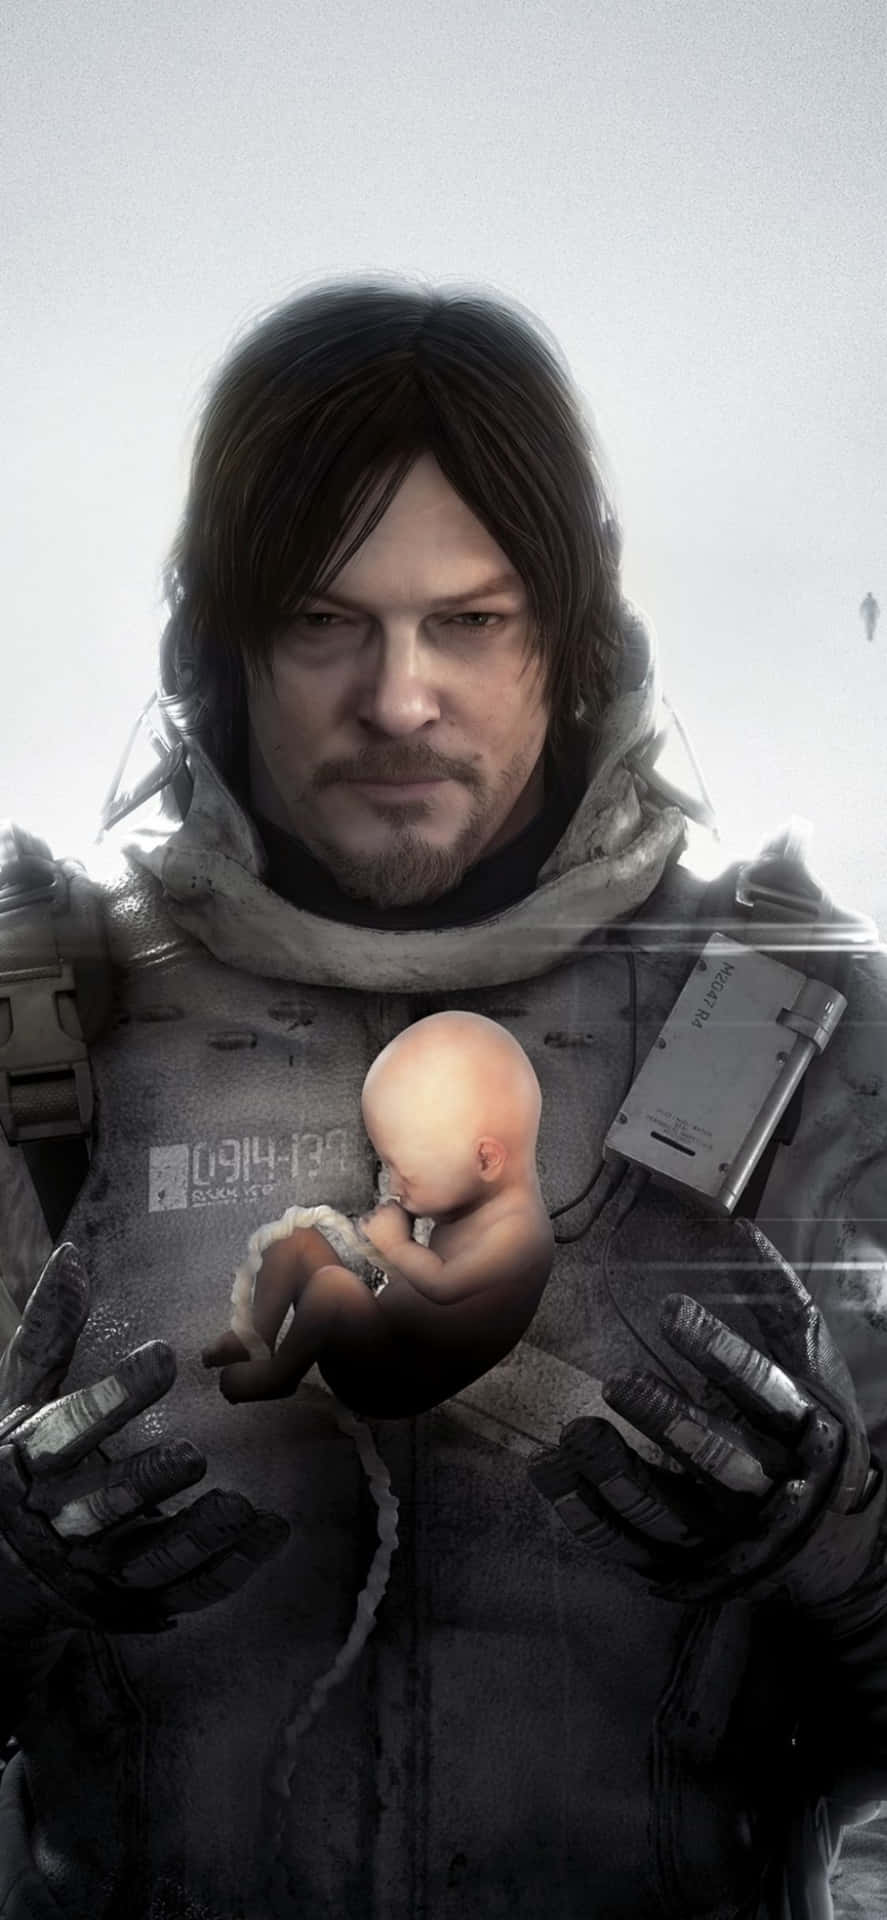 Conquer the post-apocalyptic world with the new Iphone Xs and Death Stranding video game.